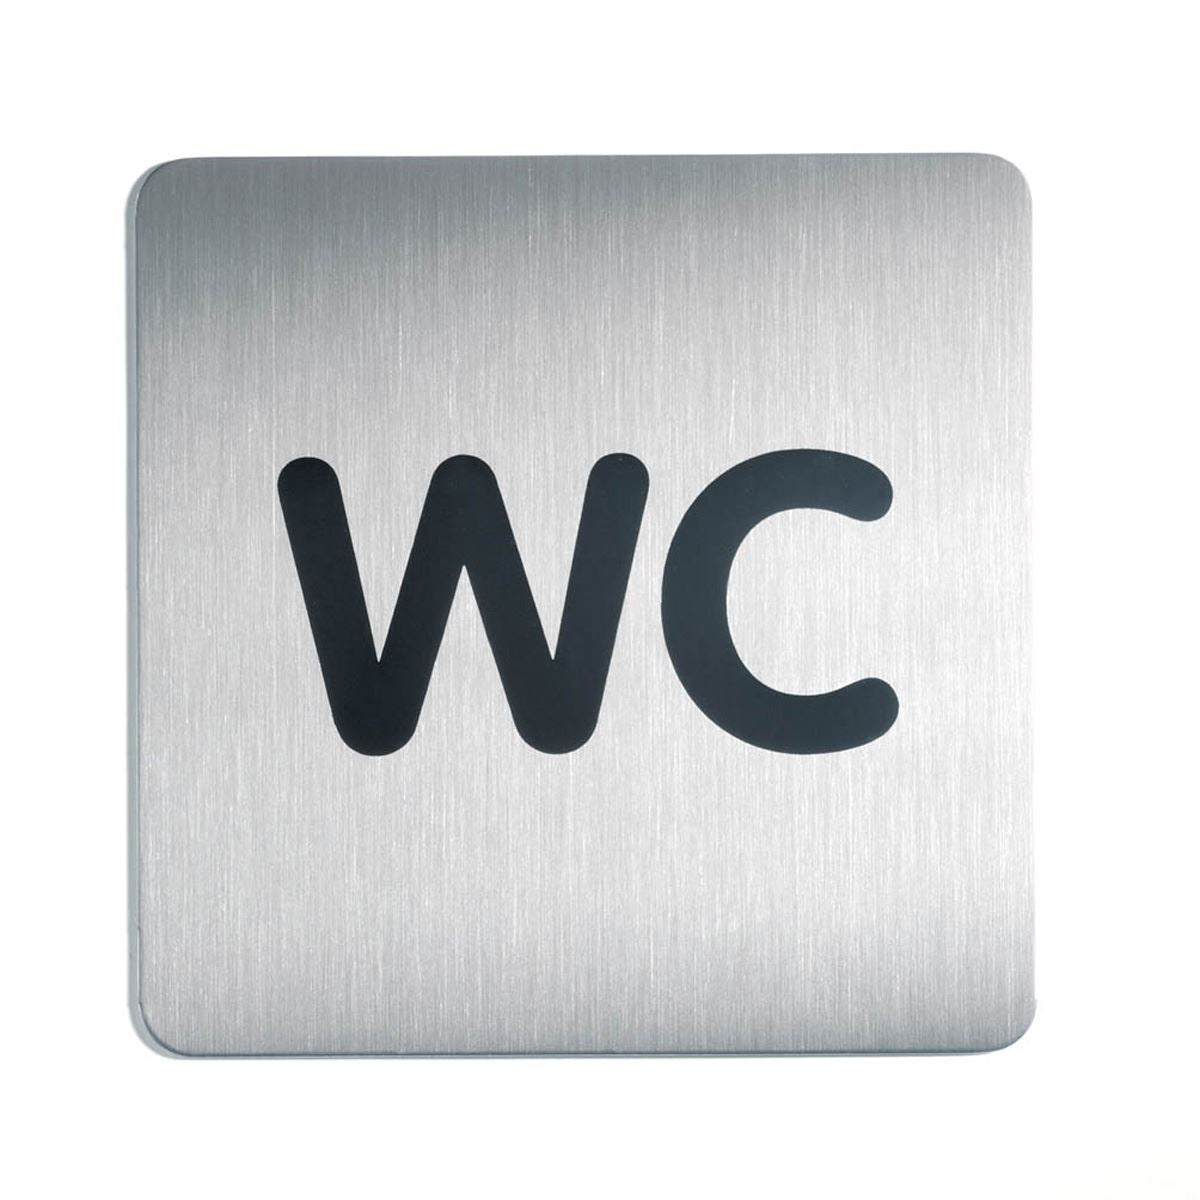 Durable Adhesive WC Symbol Square Bathroom Toilet Sign | Brushed Stainless Steel